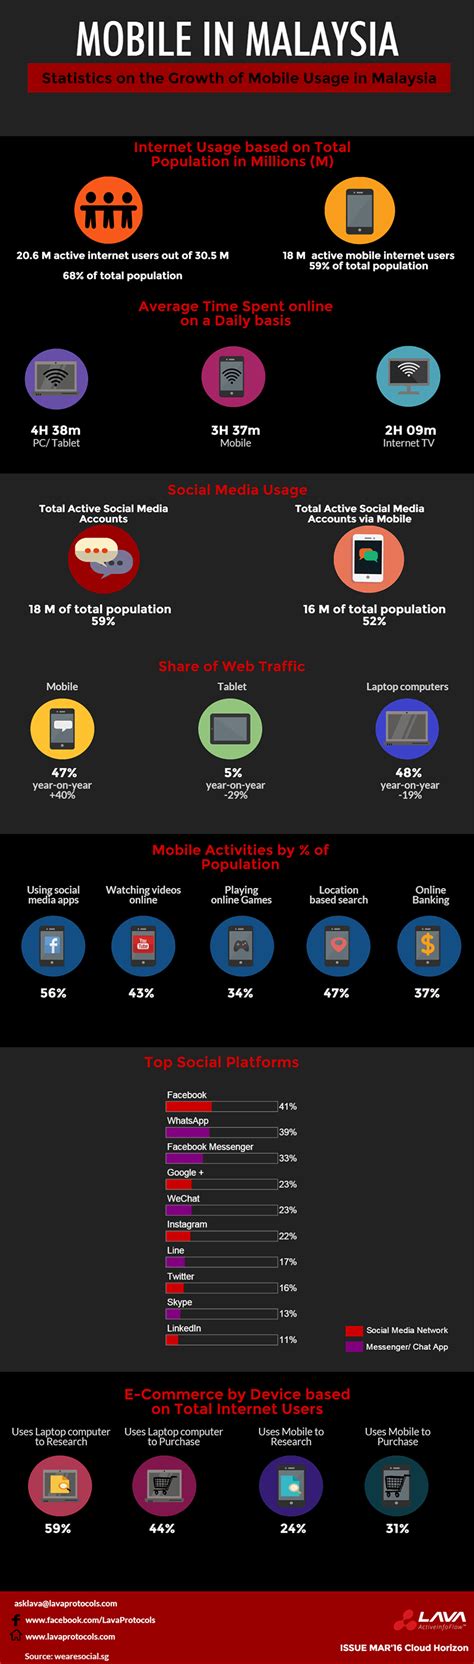 But to find the best one, you will. Mobile in Malaysia: Growth of Mobile Usage [Infographic ...